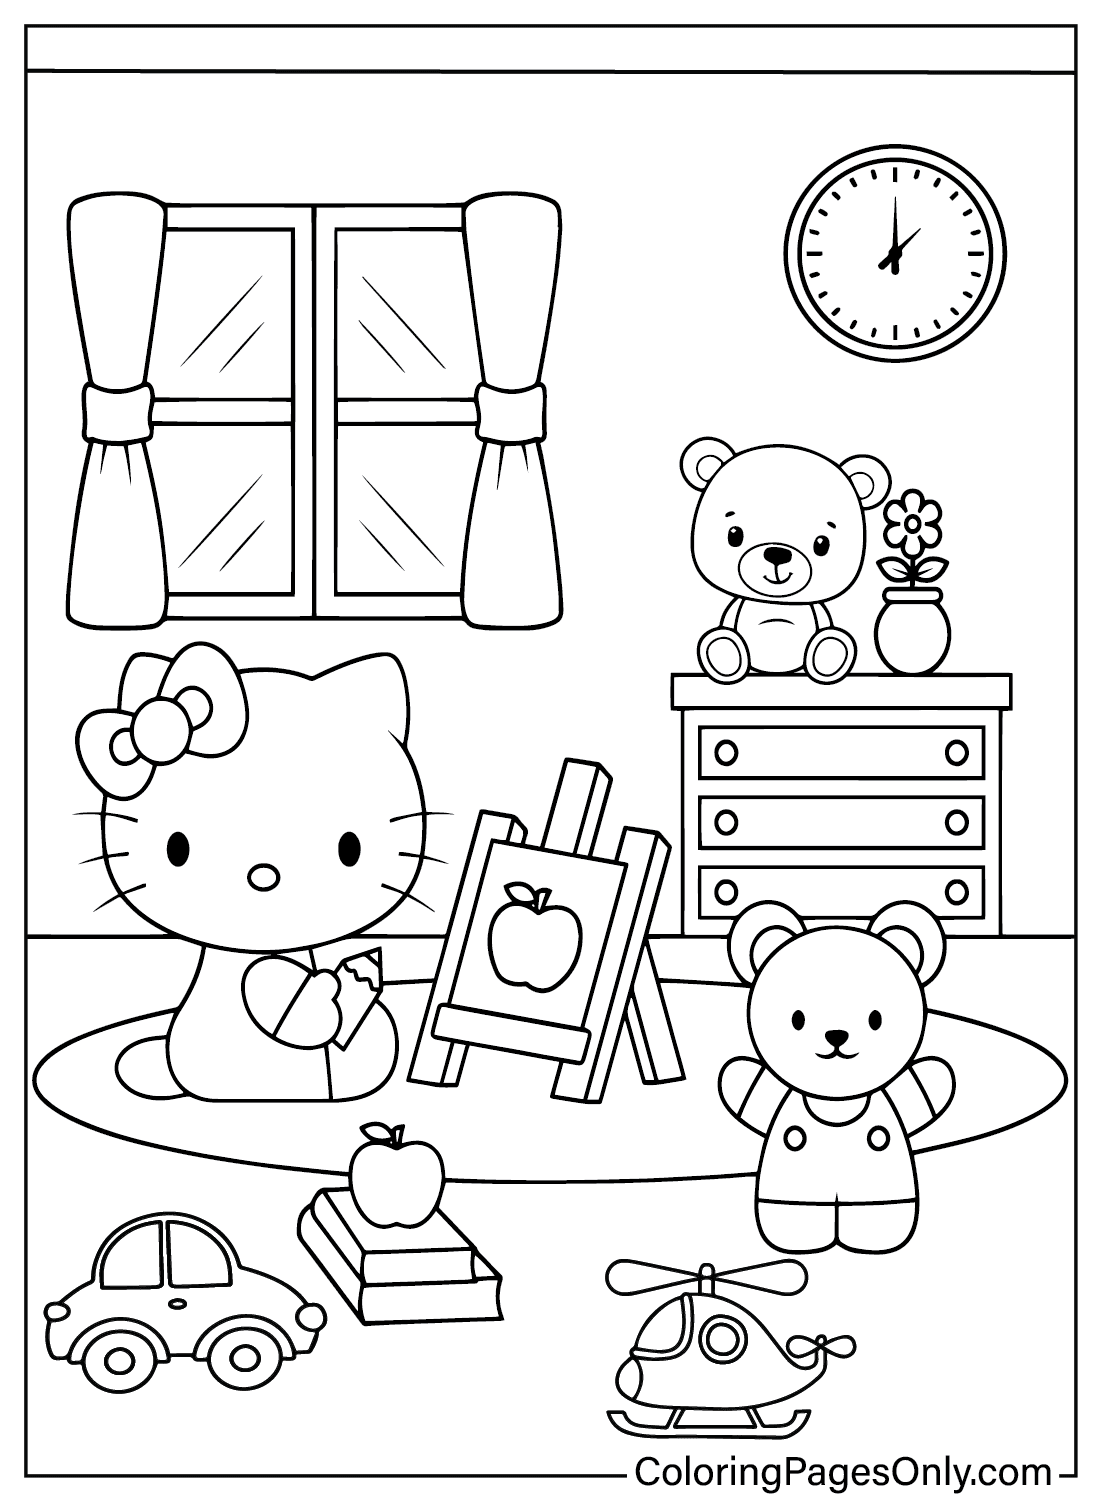 Hello Kitty Images Coloring Page - Free Printable Coloring Pages